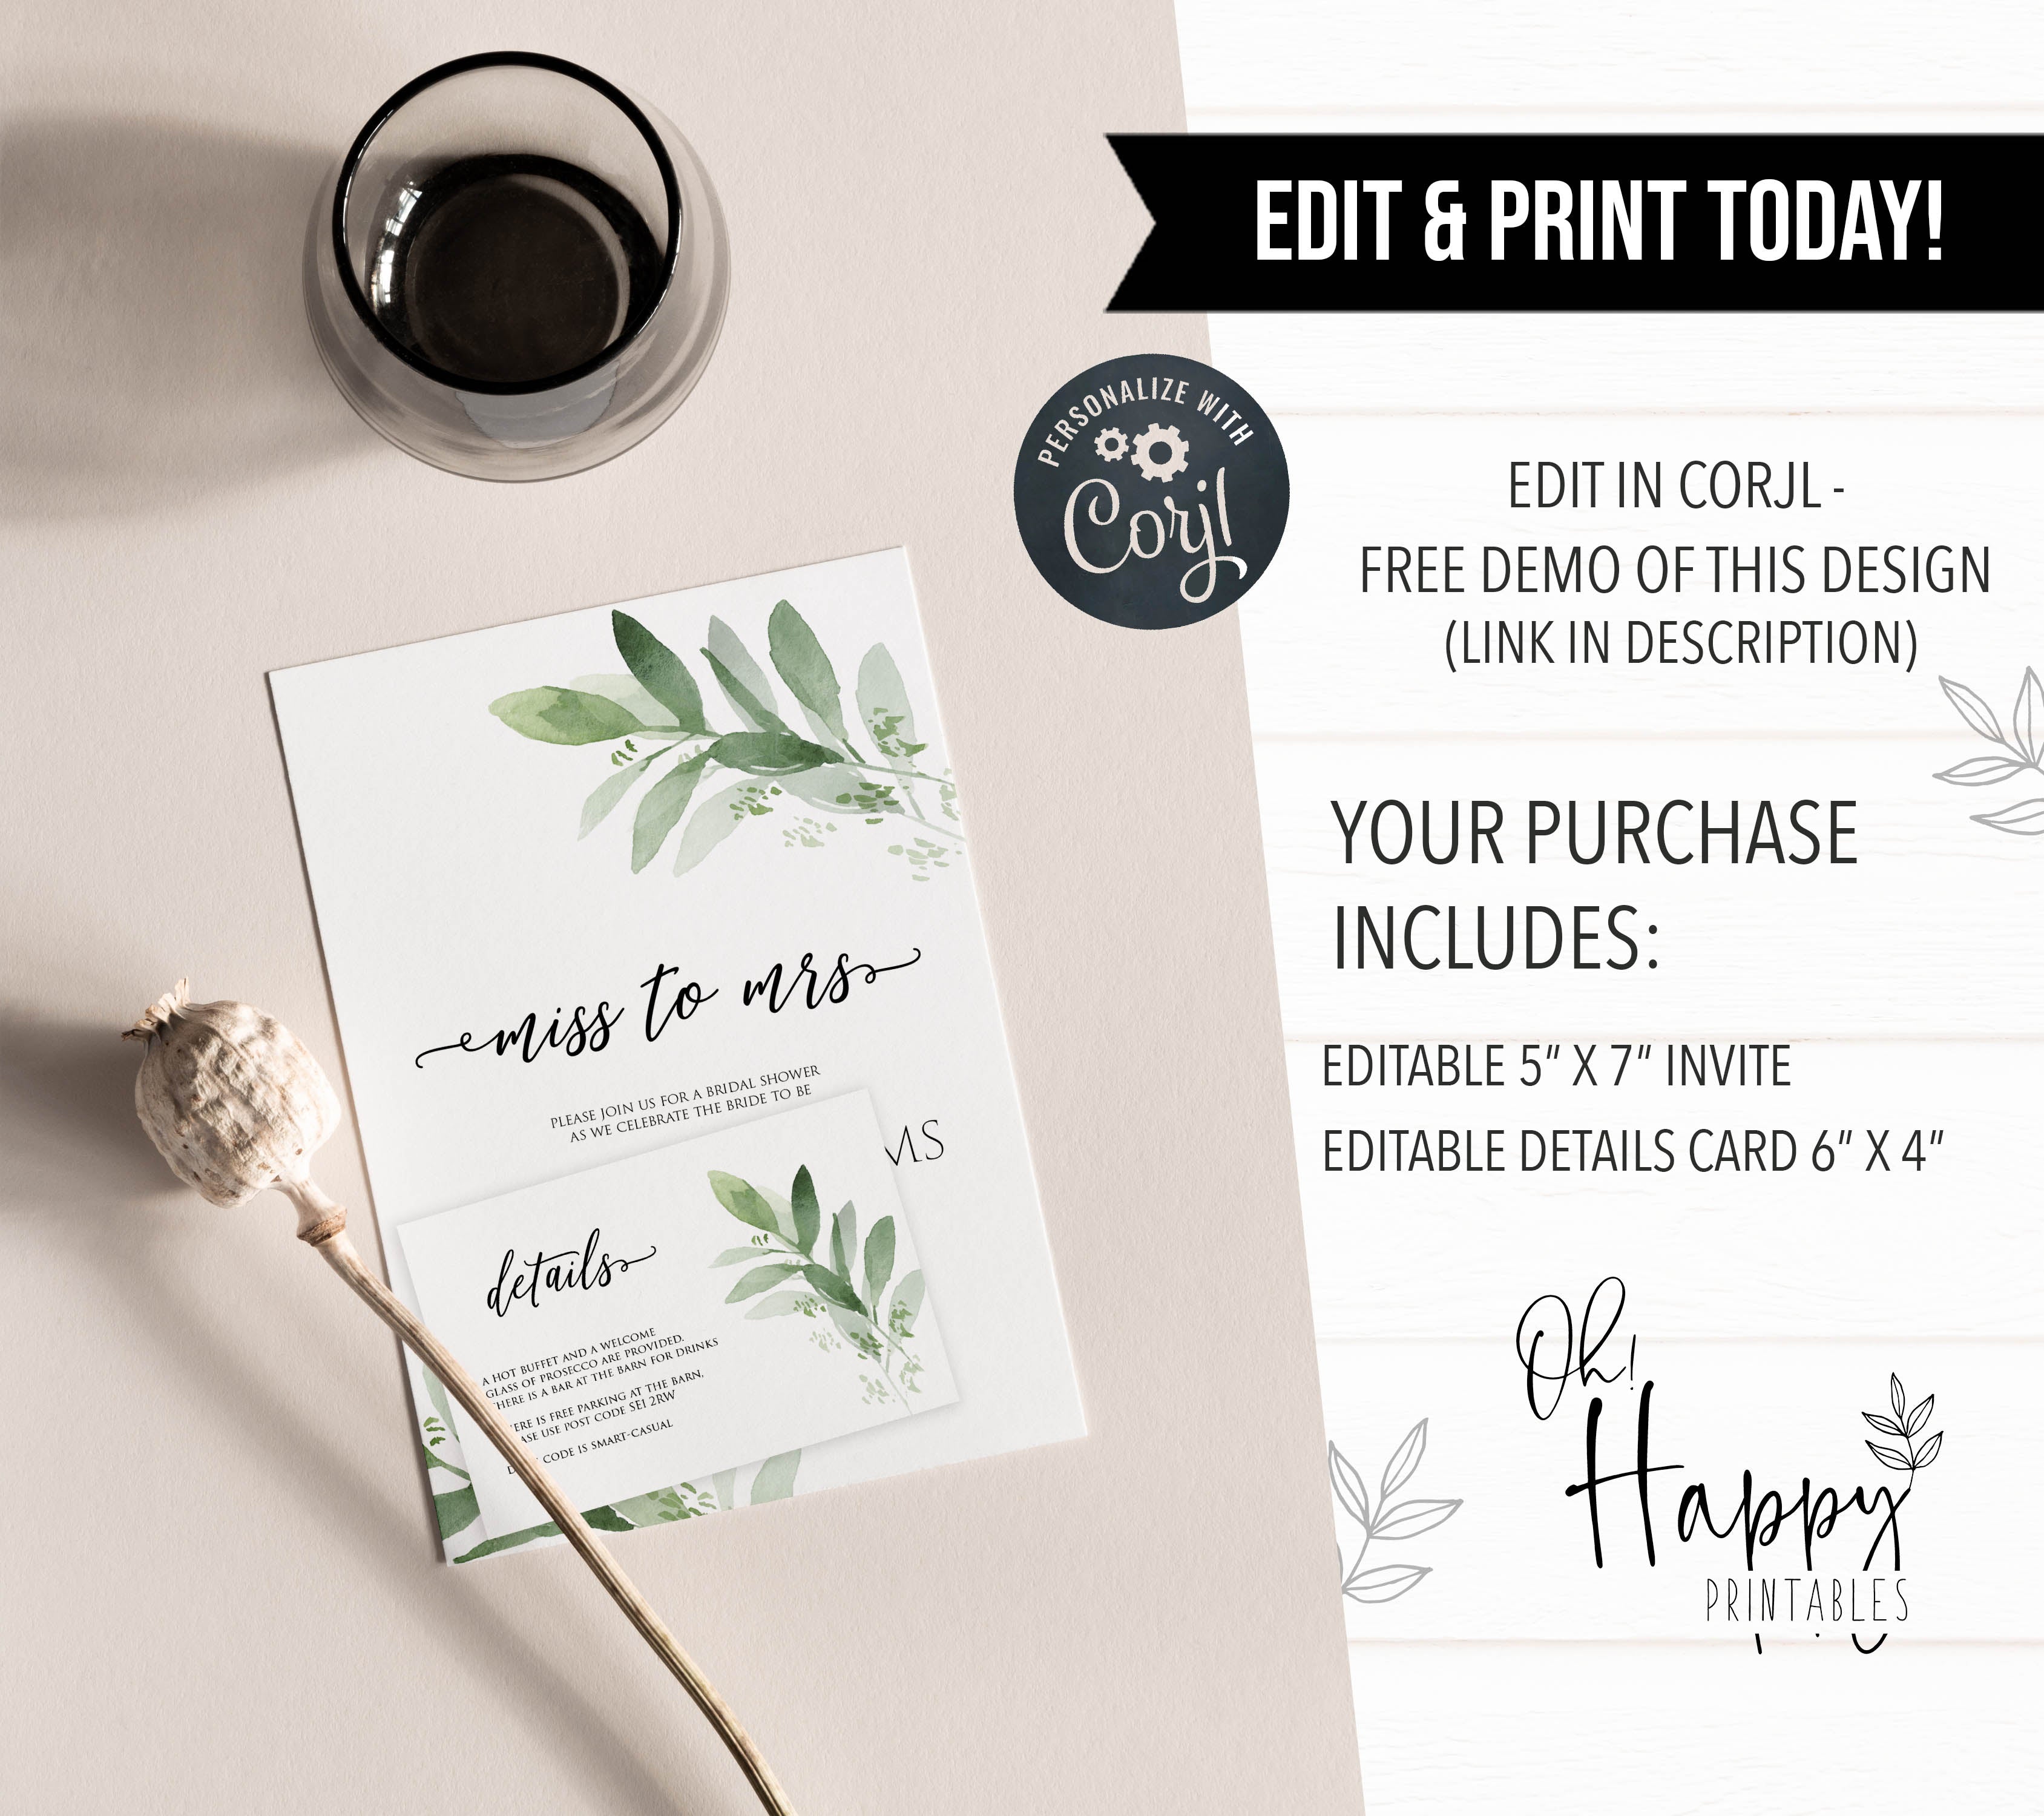 EDITABLE miss to mrs bridal shower invite, greenery bridal shower invite, mobile invites, editable bridal shower invite, corjl bridal invite, bachelorette party invite